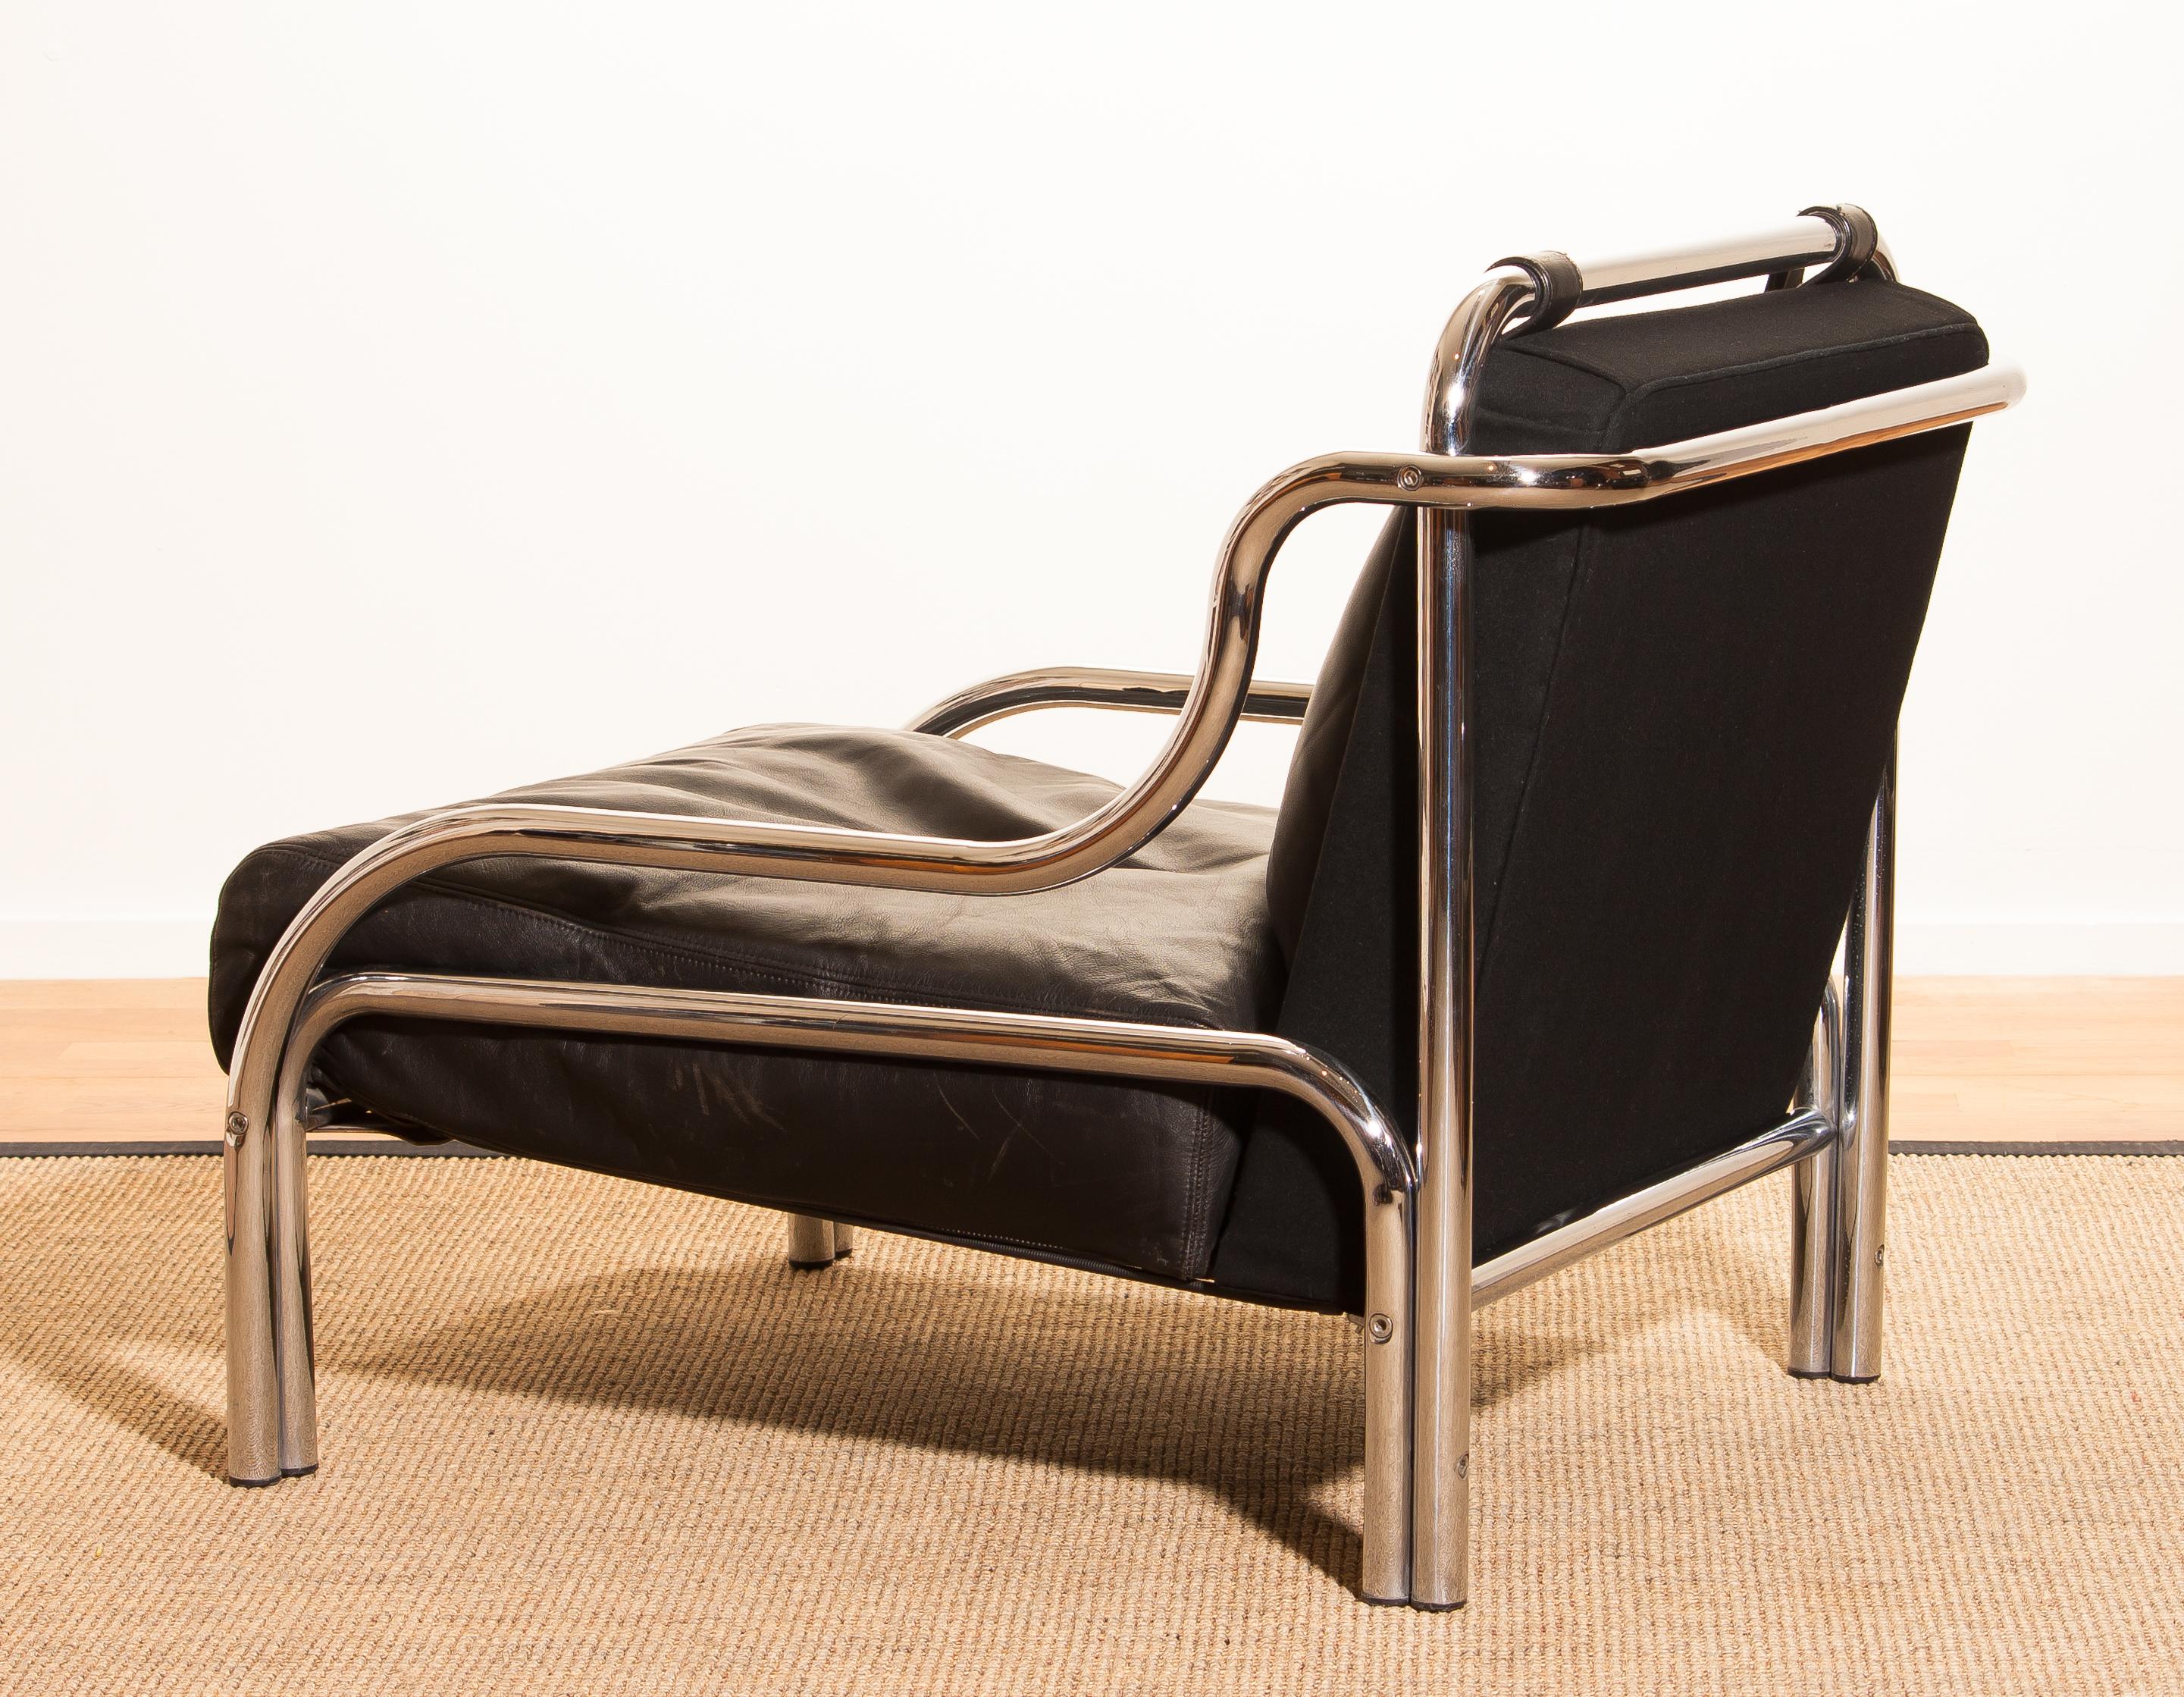 1960s, Leather and Chrome Lounge Chair by Gae Aulenti for Poltronova 2